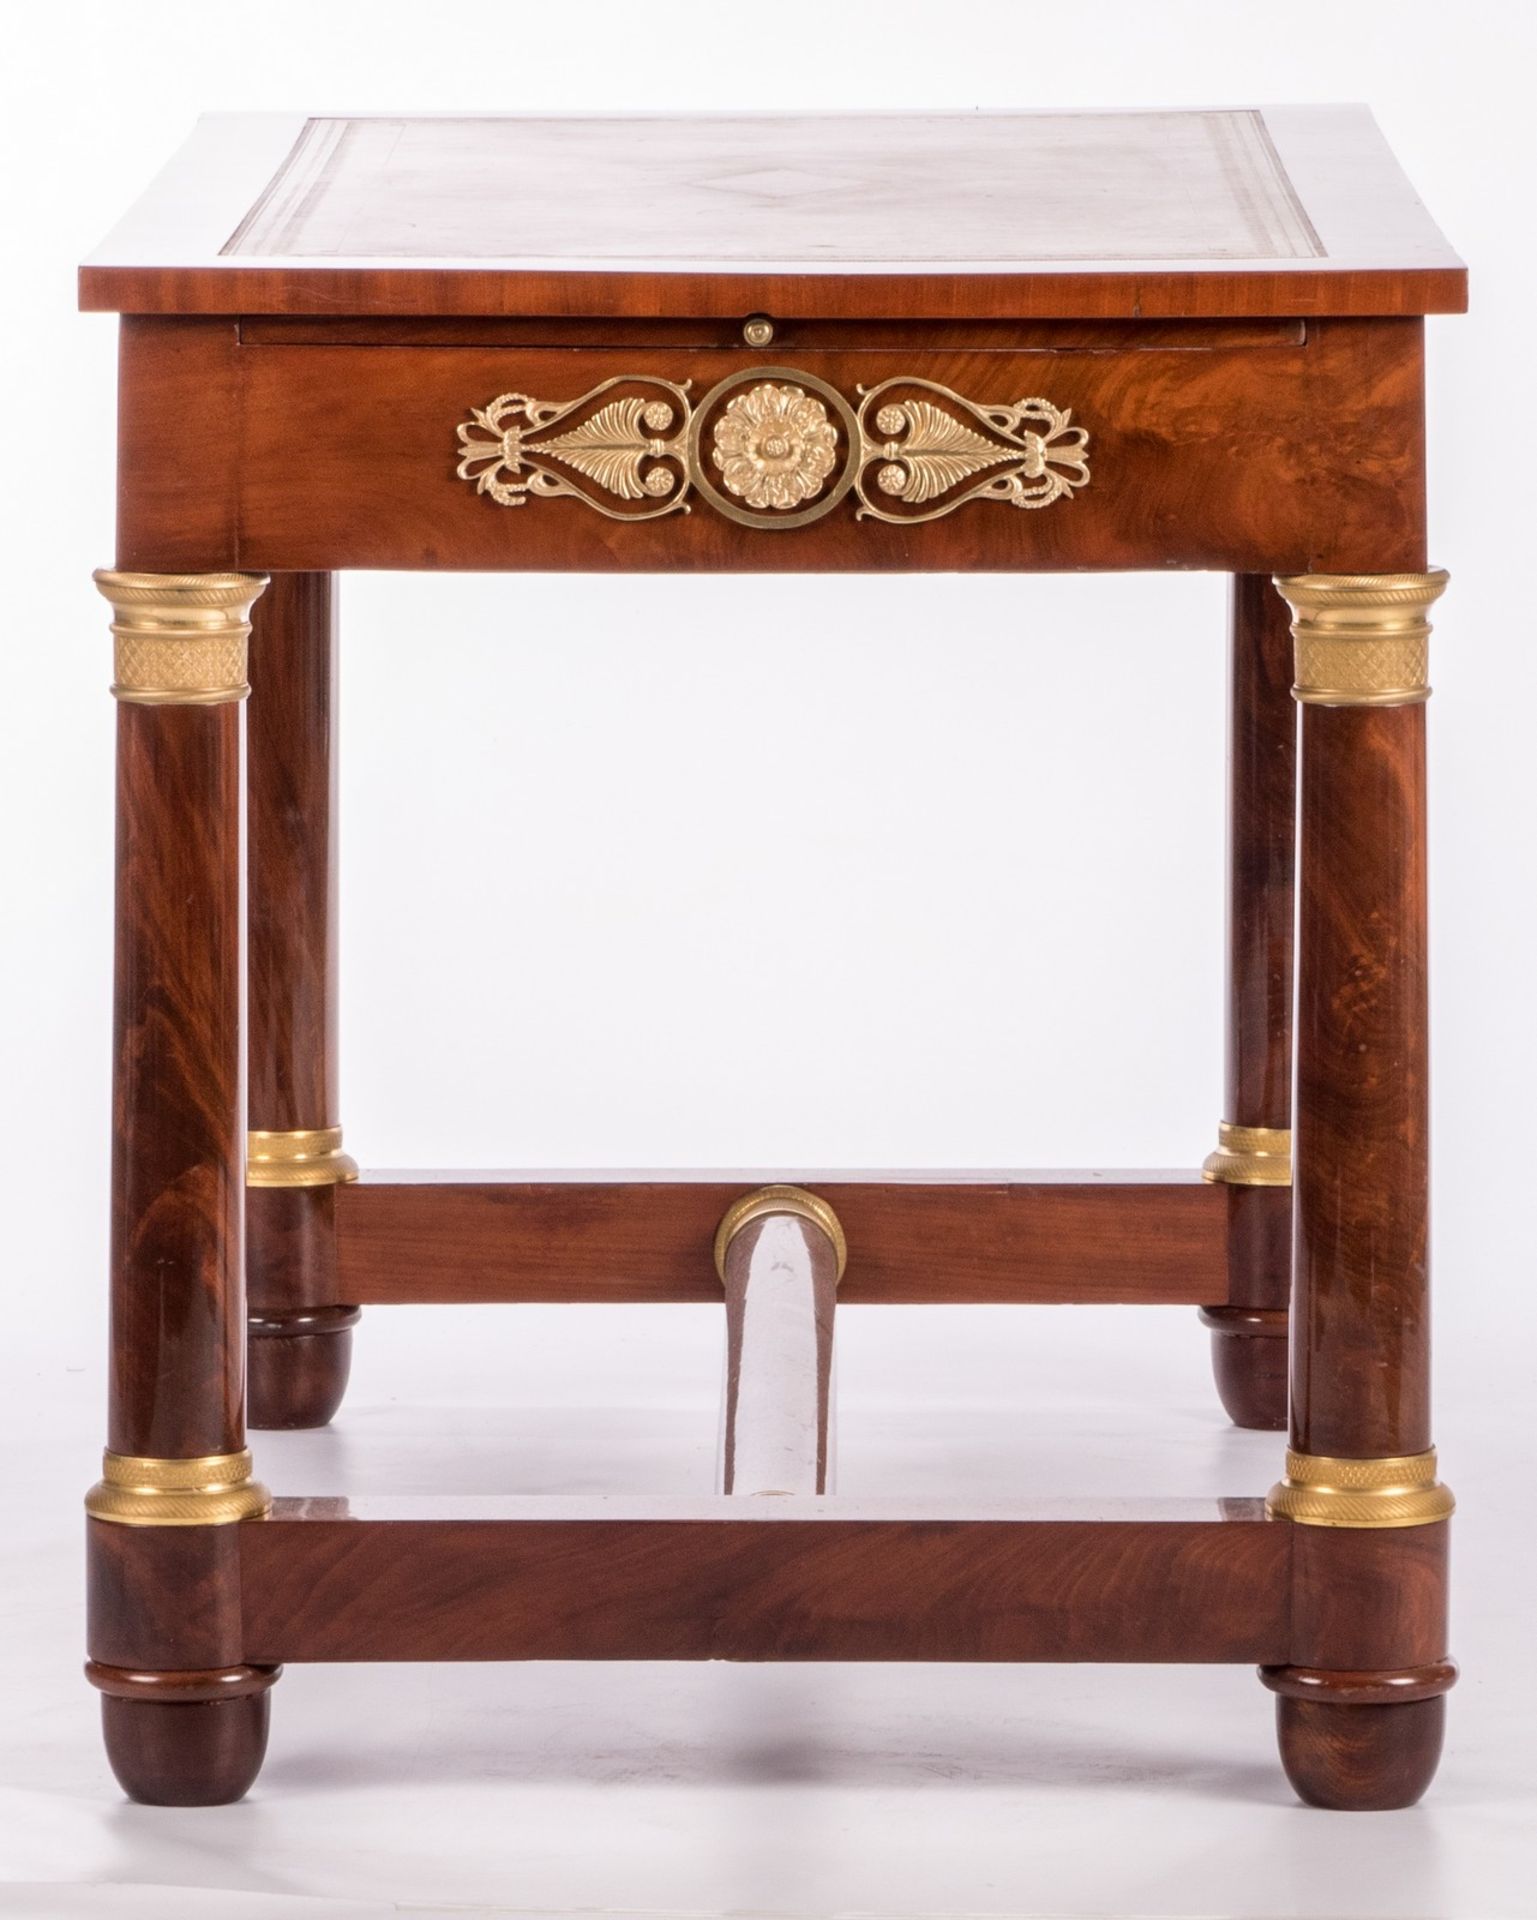 A Neoclassical mahogany writing desk with fine gilt bronze mounts and leather leaf, H 80,5 - W 127 - - Bild 2 aus 11